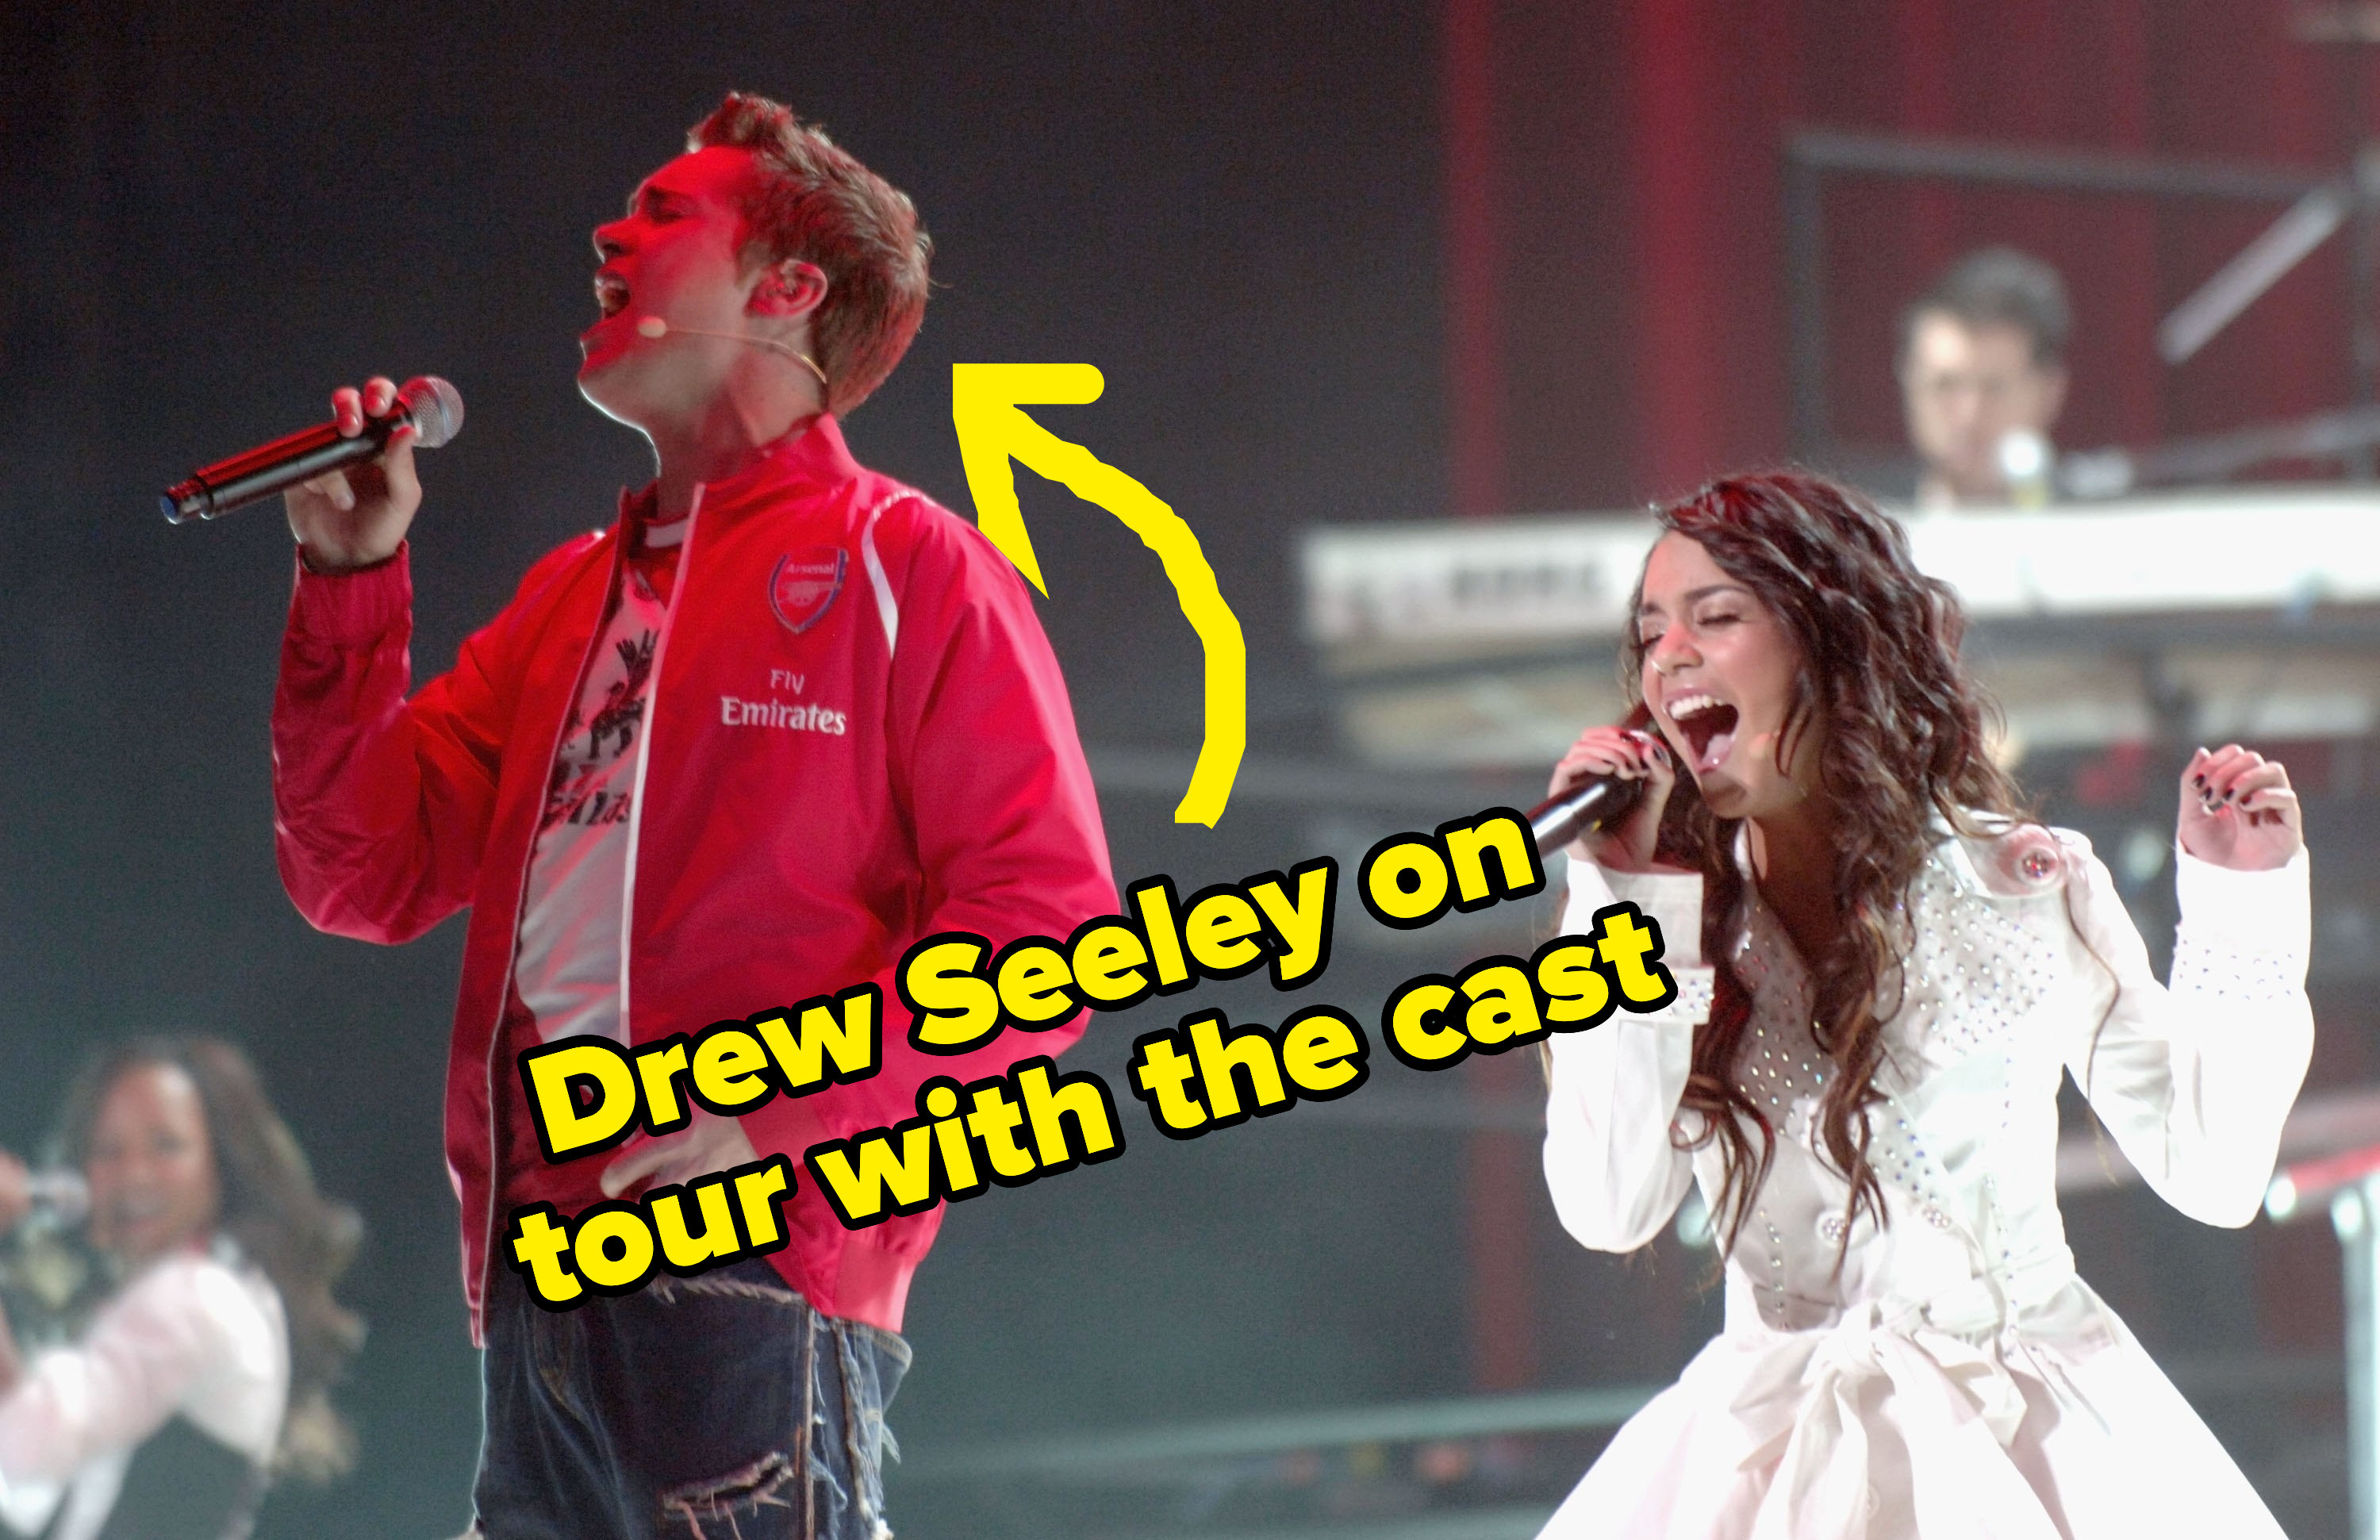 Drew Seeley, the actual singing voice for Troy, on tour with the cast